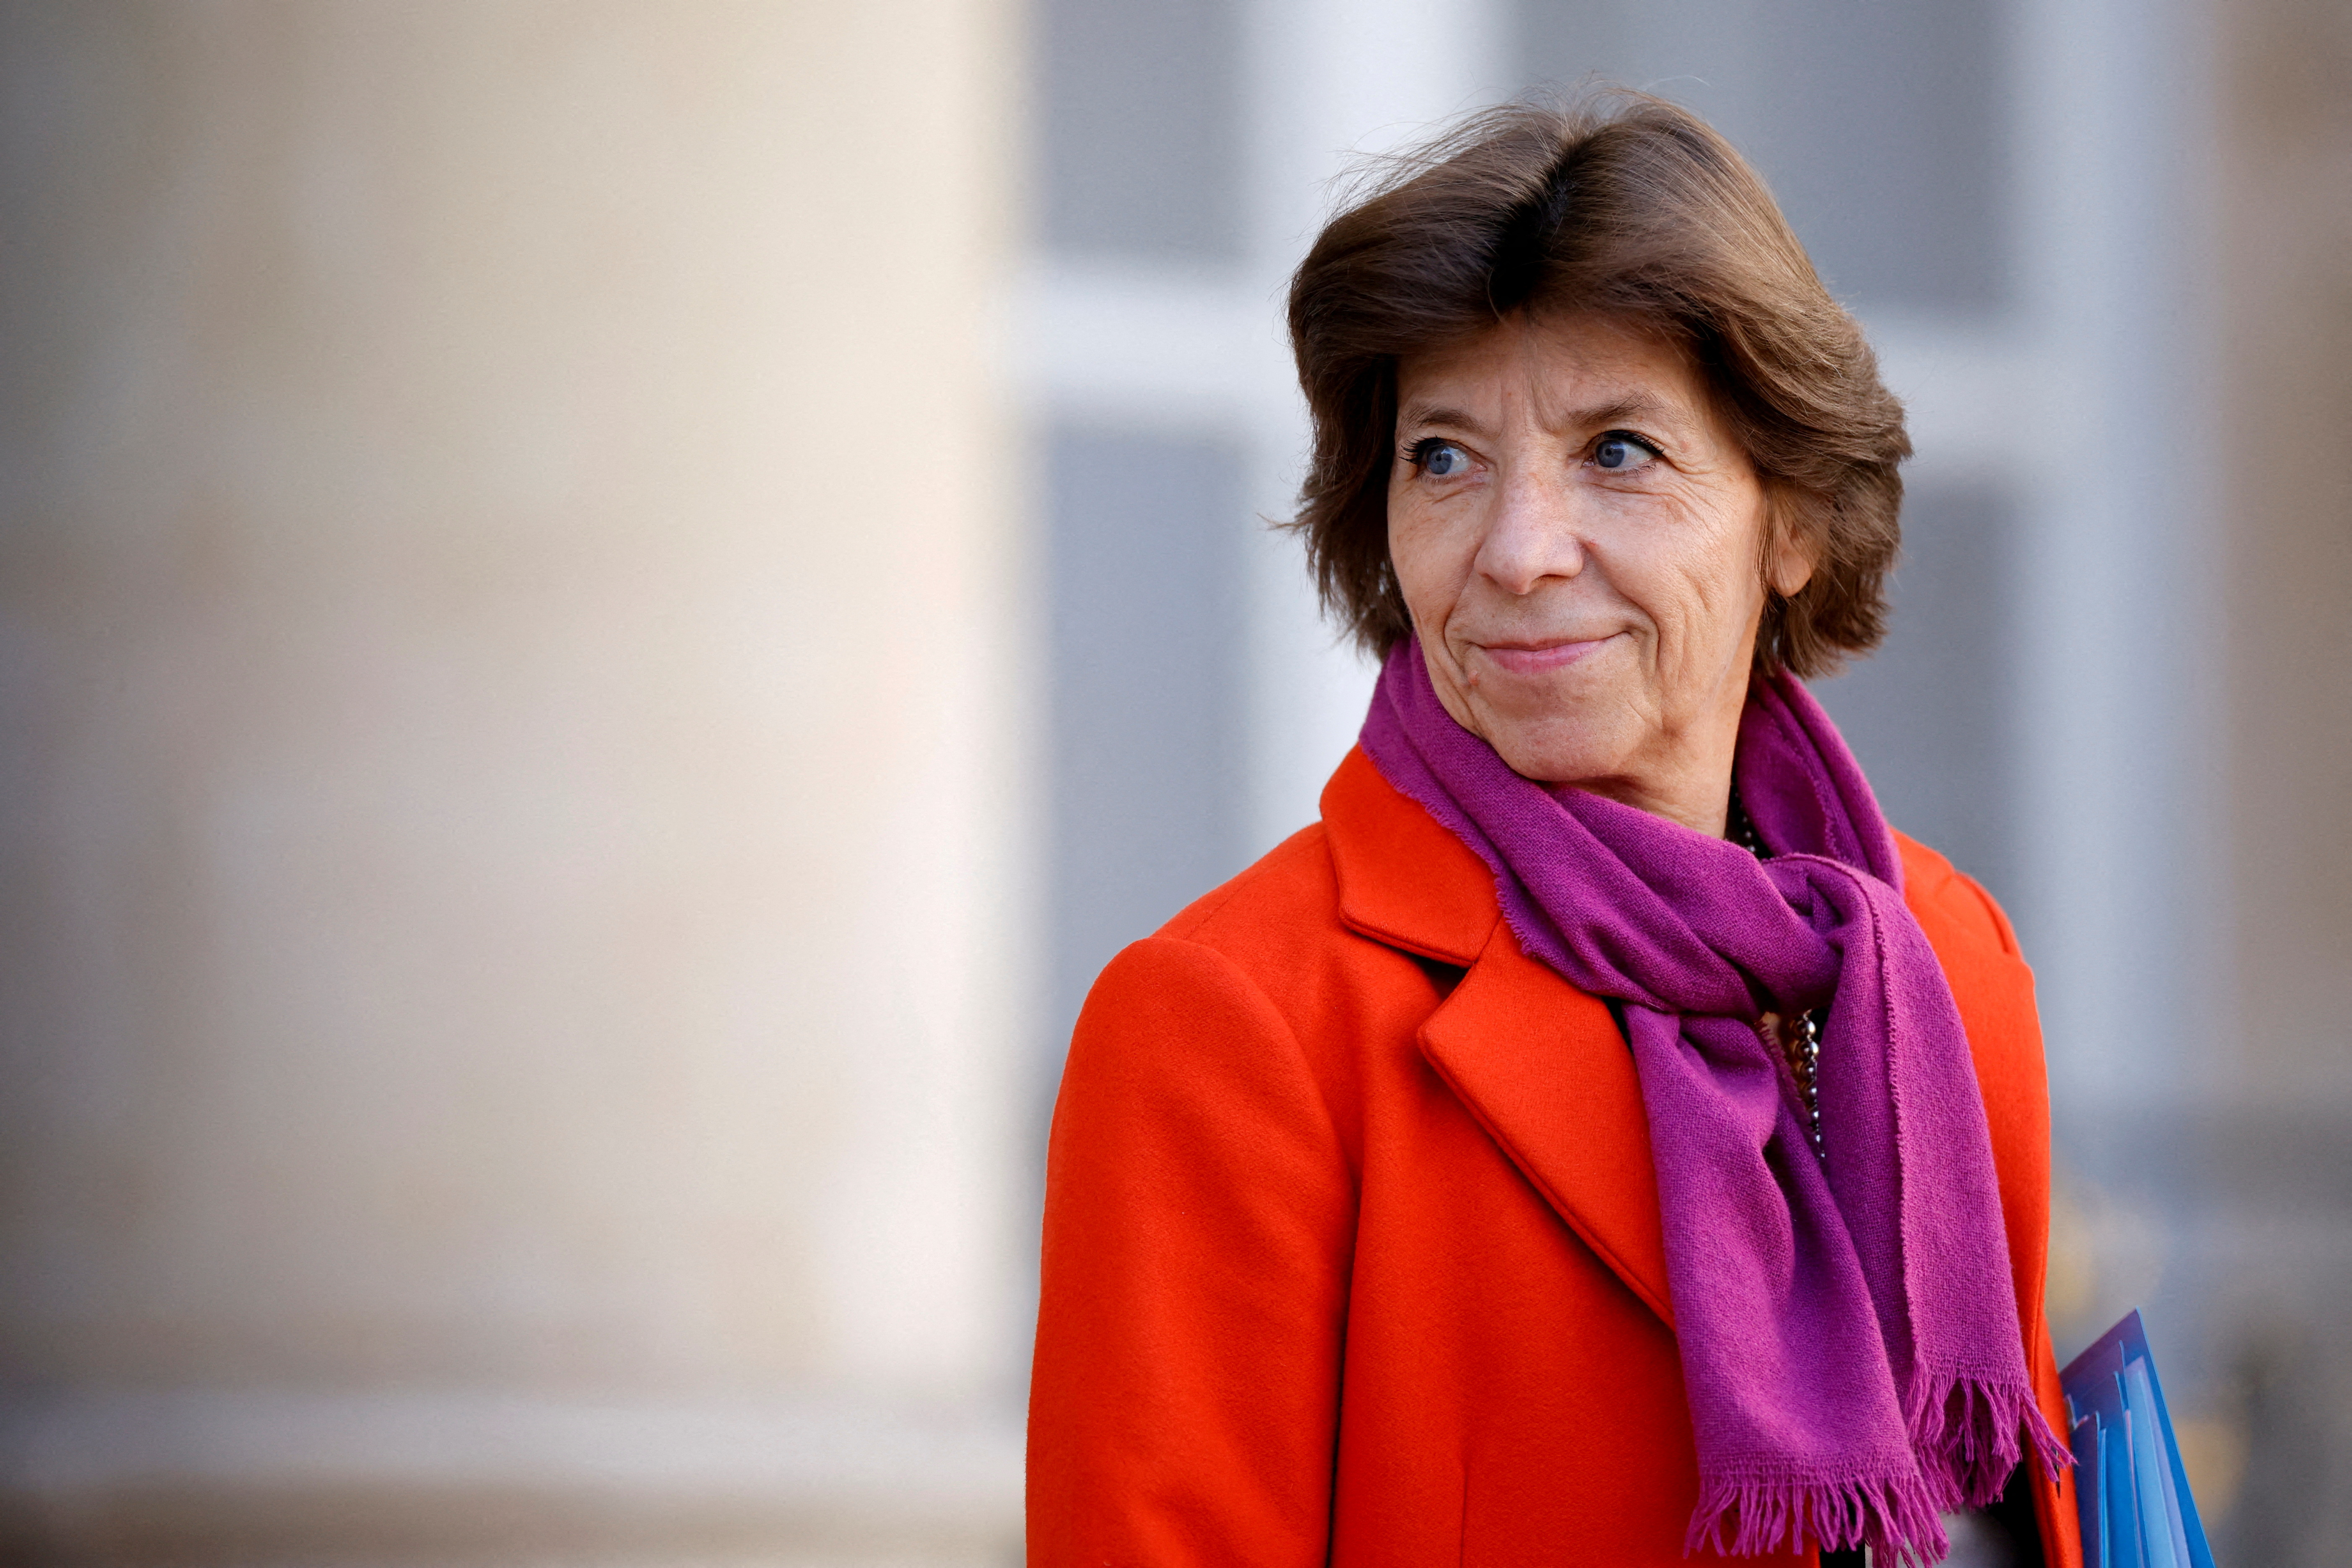 French Minister of Foreign and European Affairs Catherine Colonna at the Elysee Palace in Paris, France, October 26, 2022. REUTERS/Sarah Meyssonnier/File